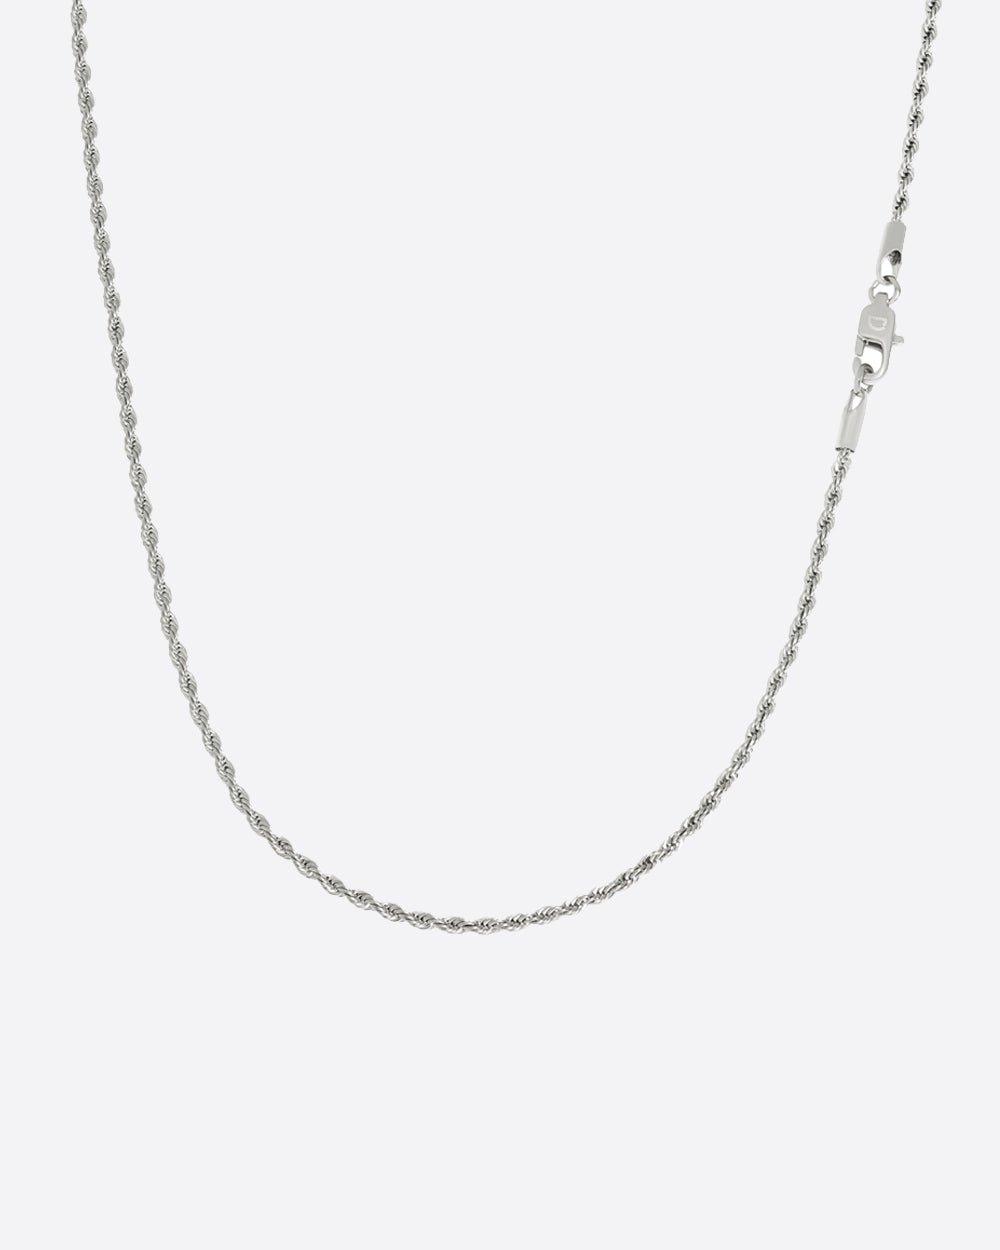 CLEAN ROPE CHAIN. - 2MM WHITE GOLD - DRIP IN THE JEWEL